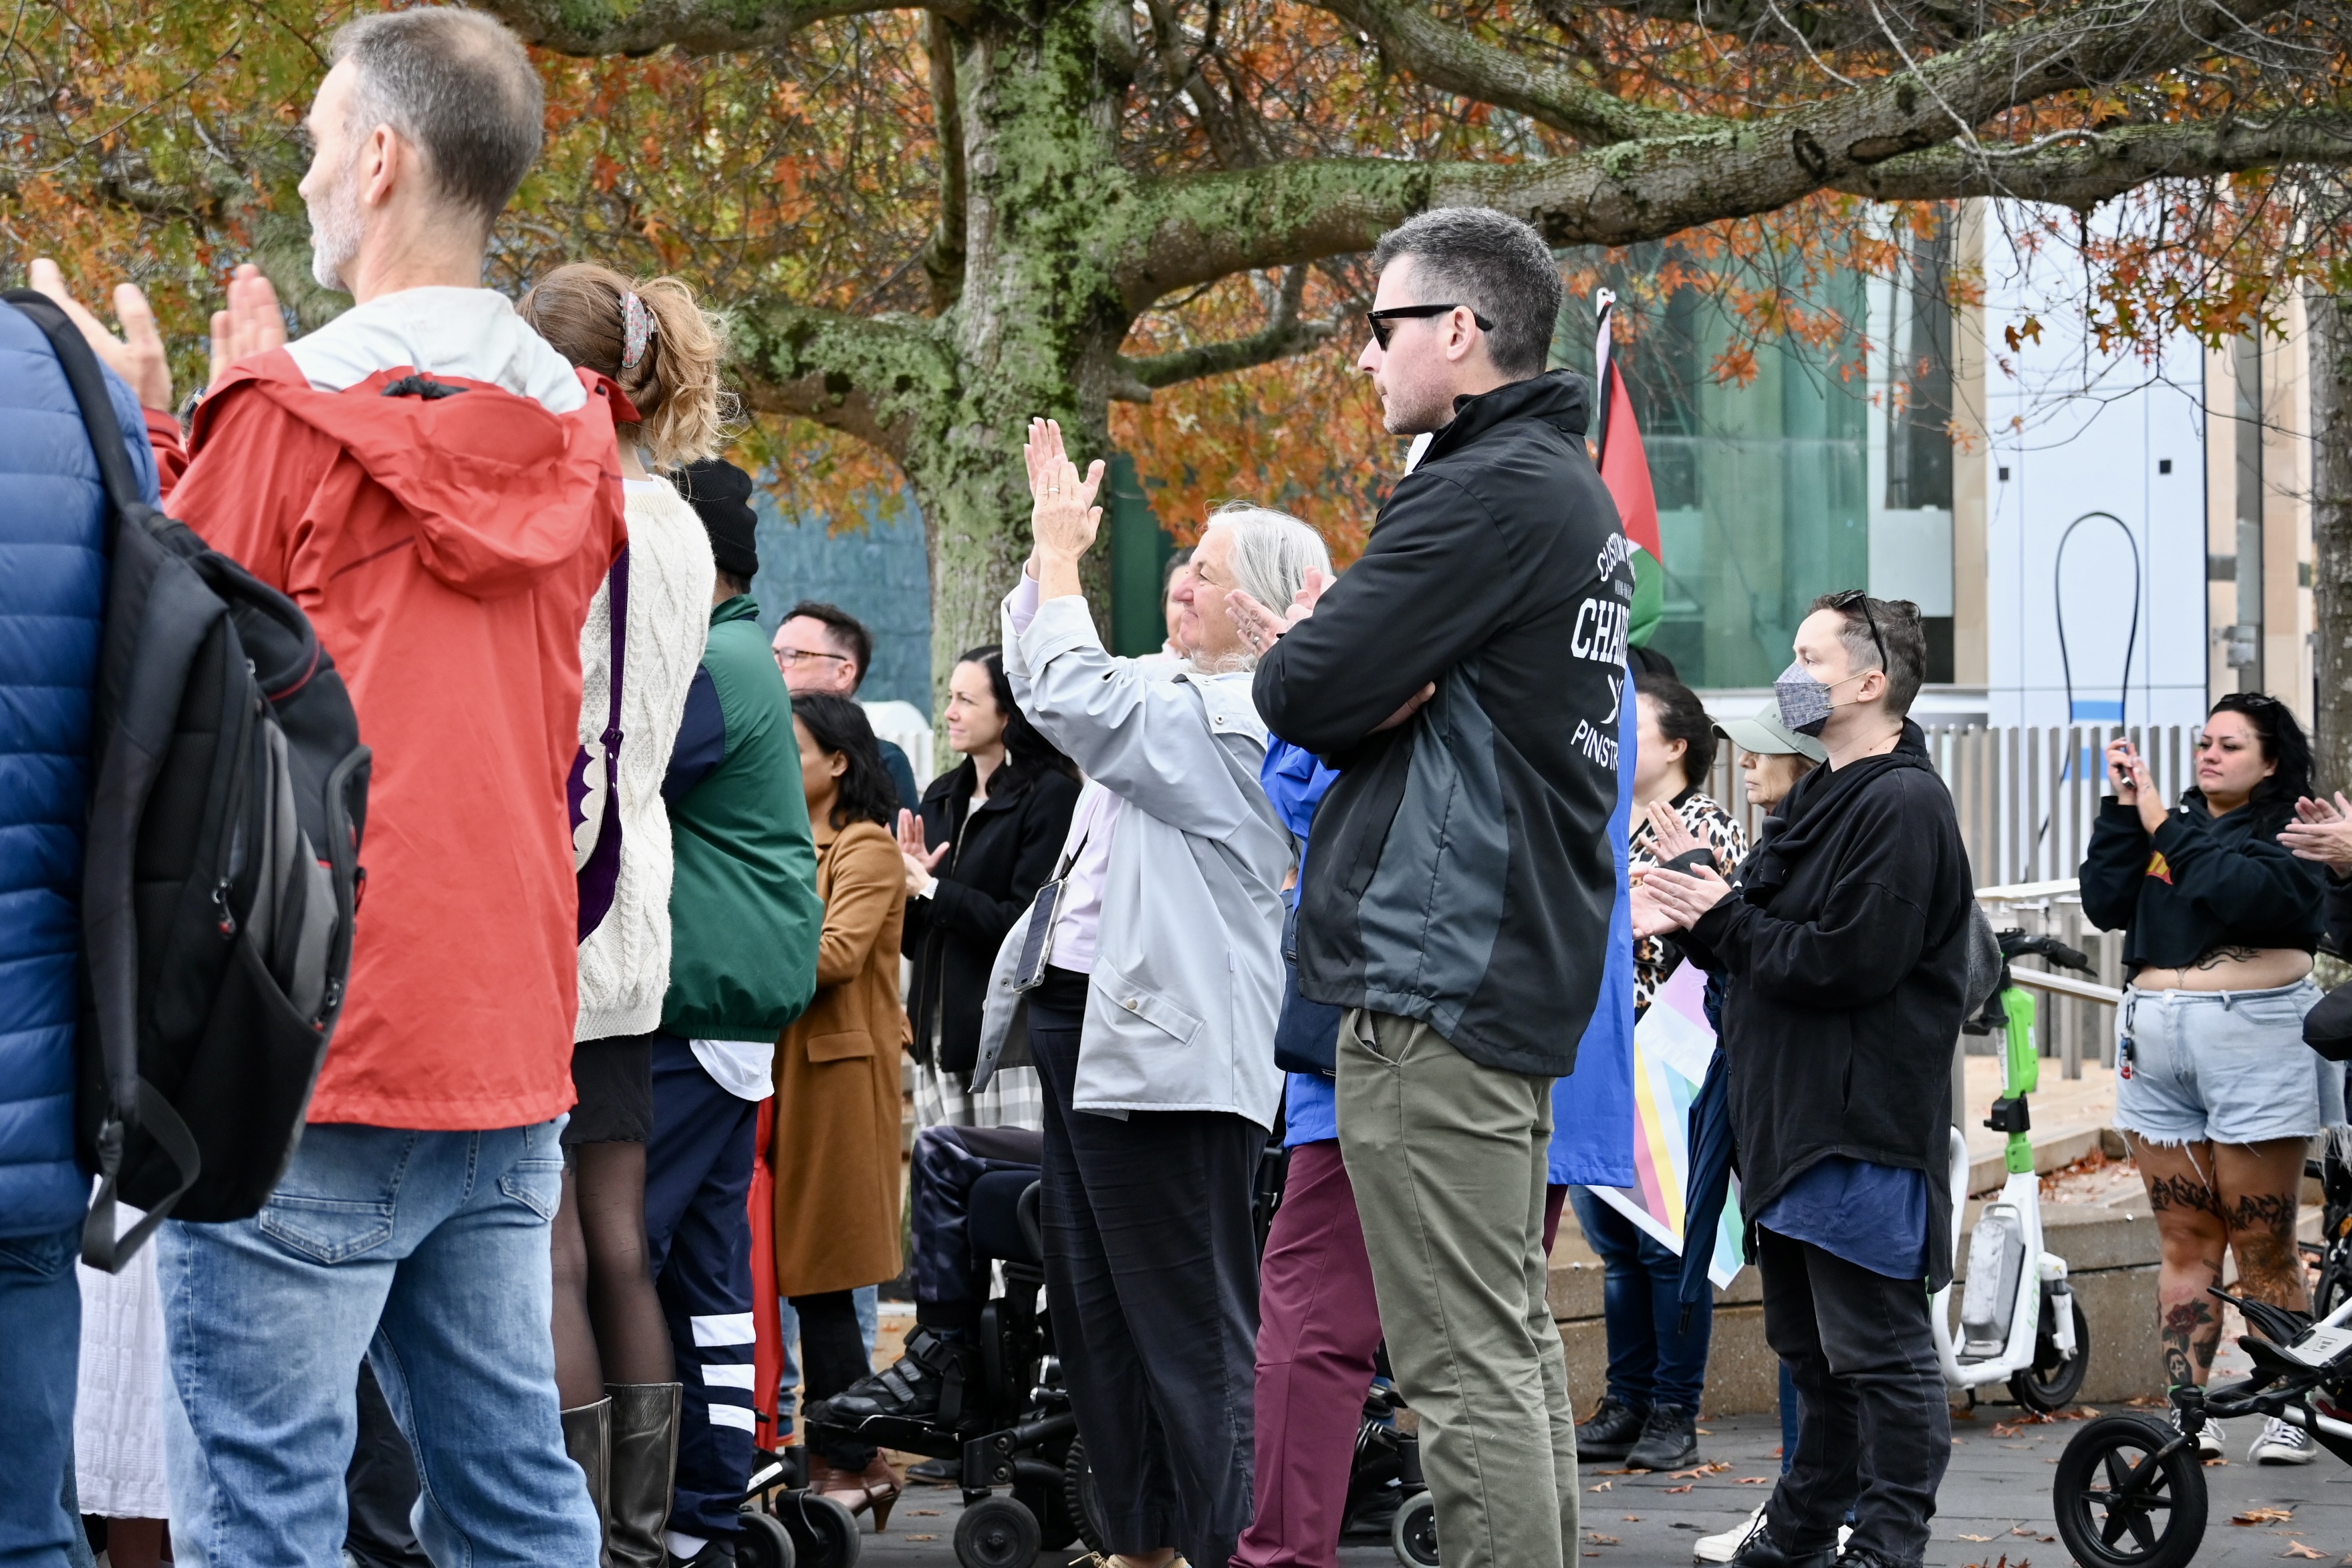 A crowd gathers at a protest rally. A woman stands in the middle raising and clapping her hands.